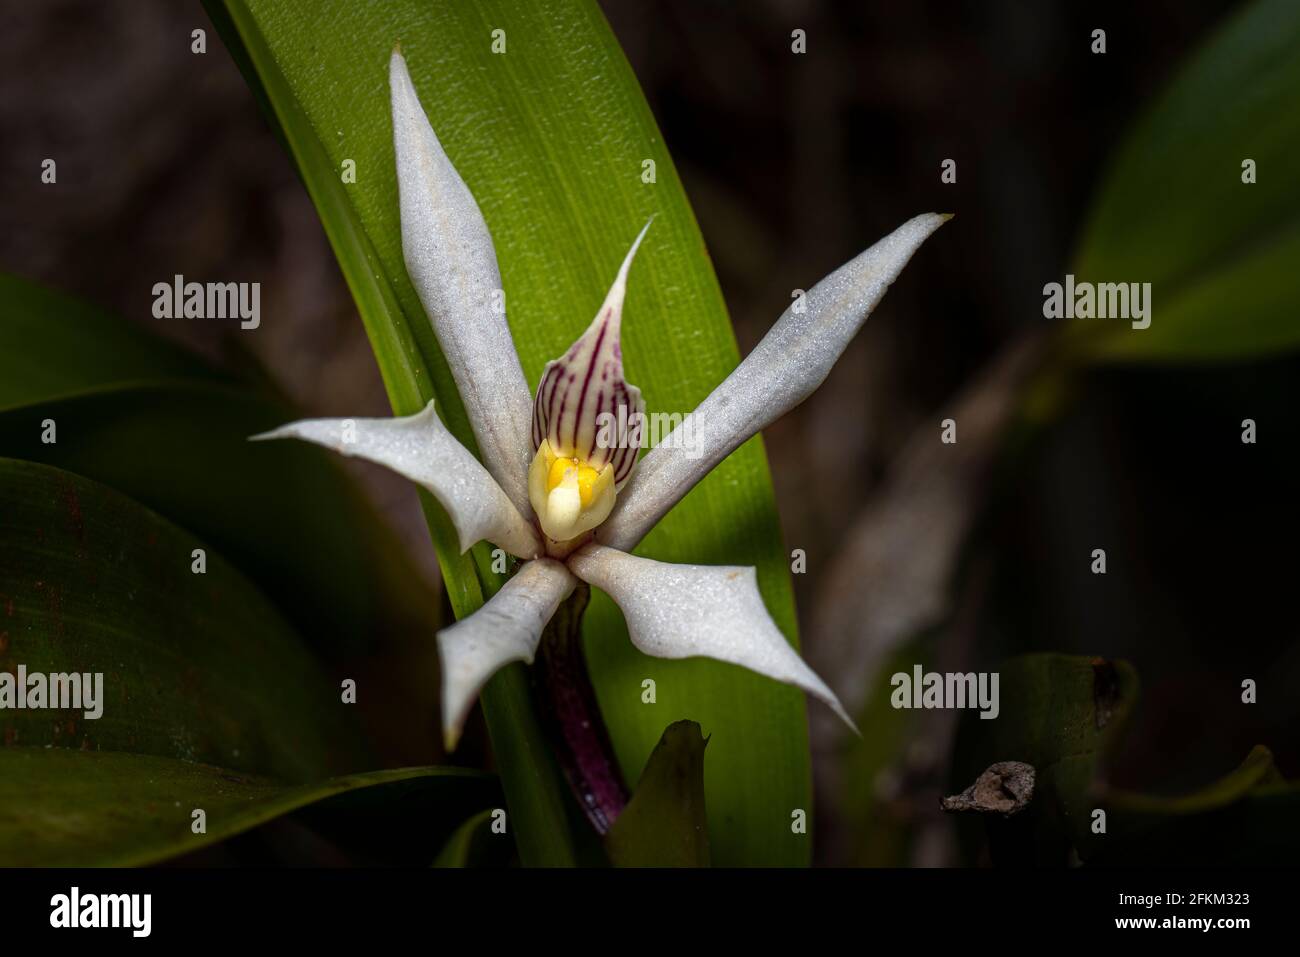 Prosthechea fragrans orchid image taken in Panama Stock Photo